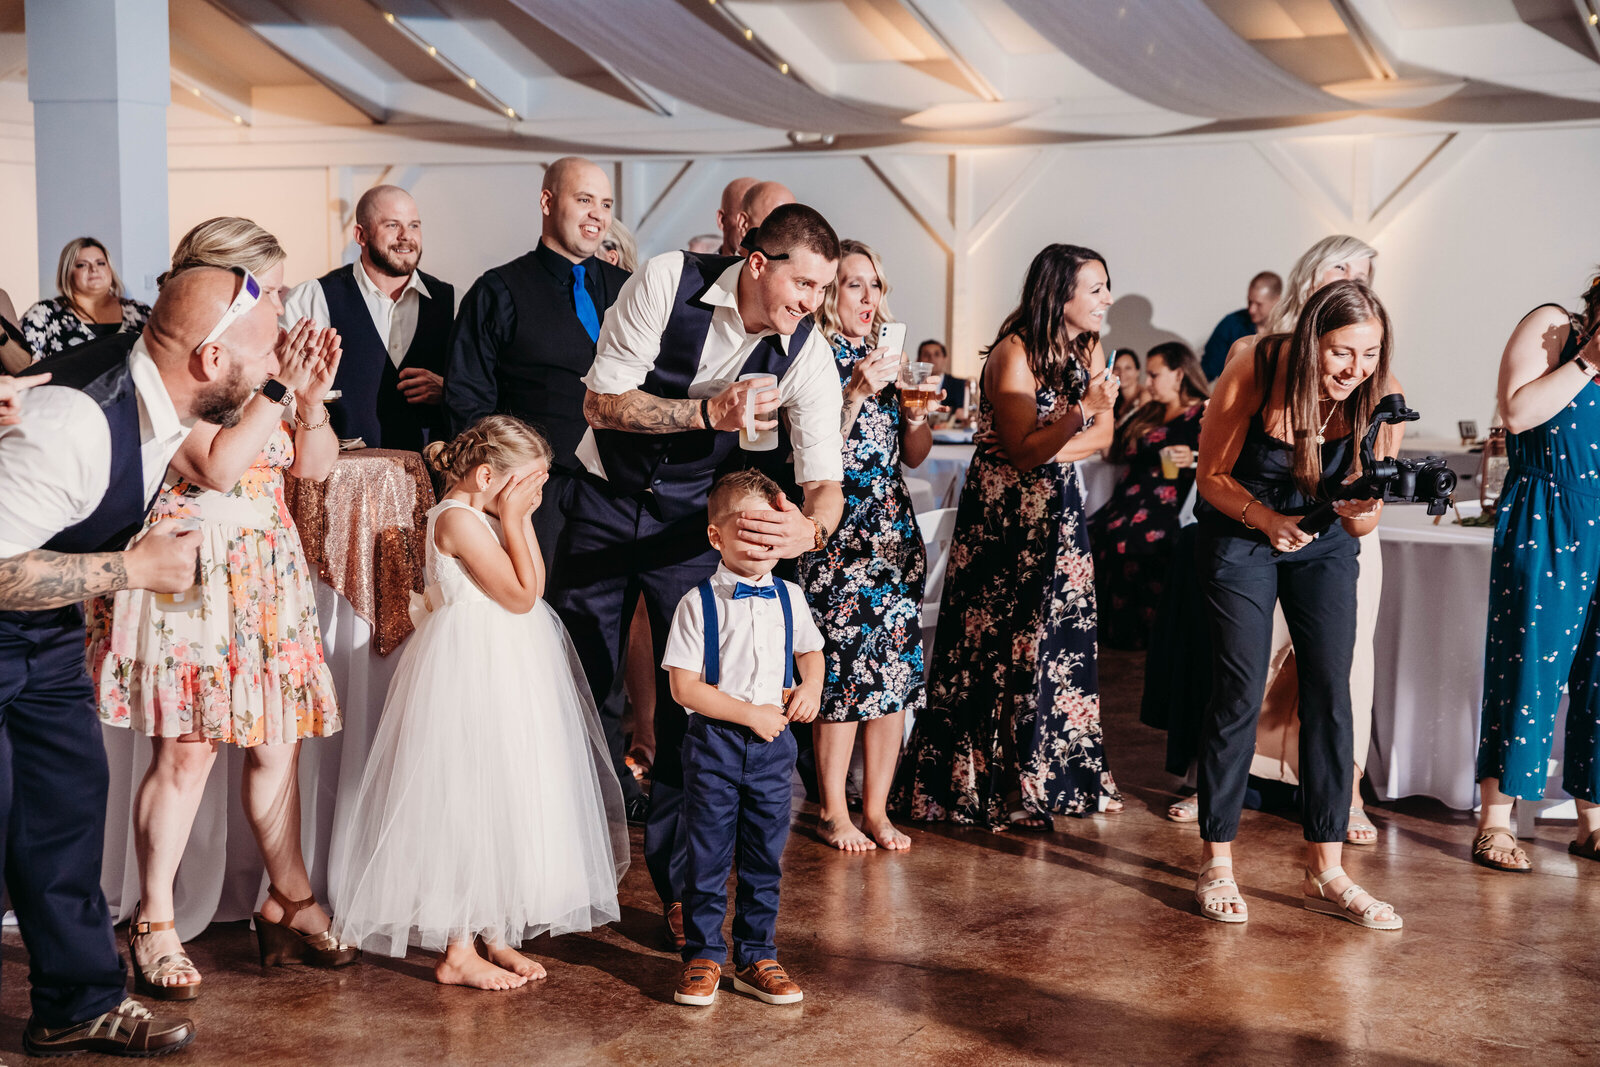 Kids close their eyes at the garter toss time of reception..